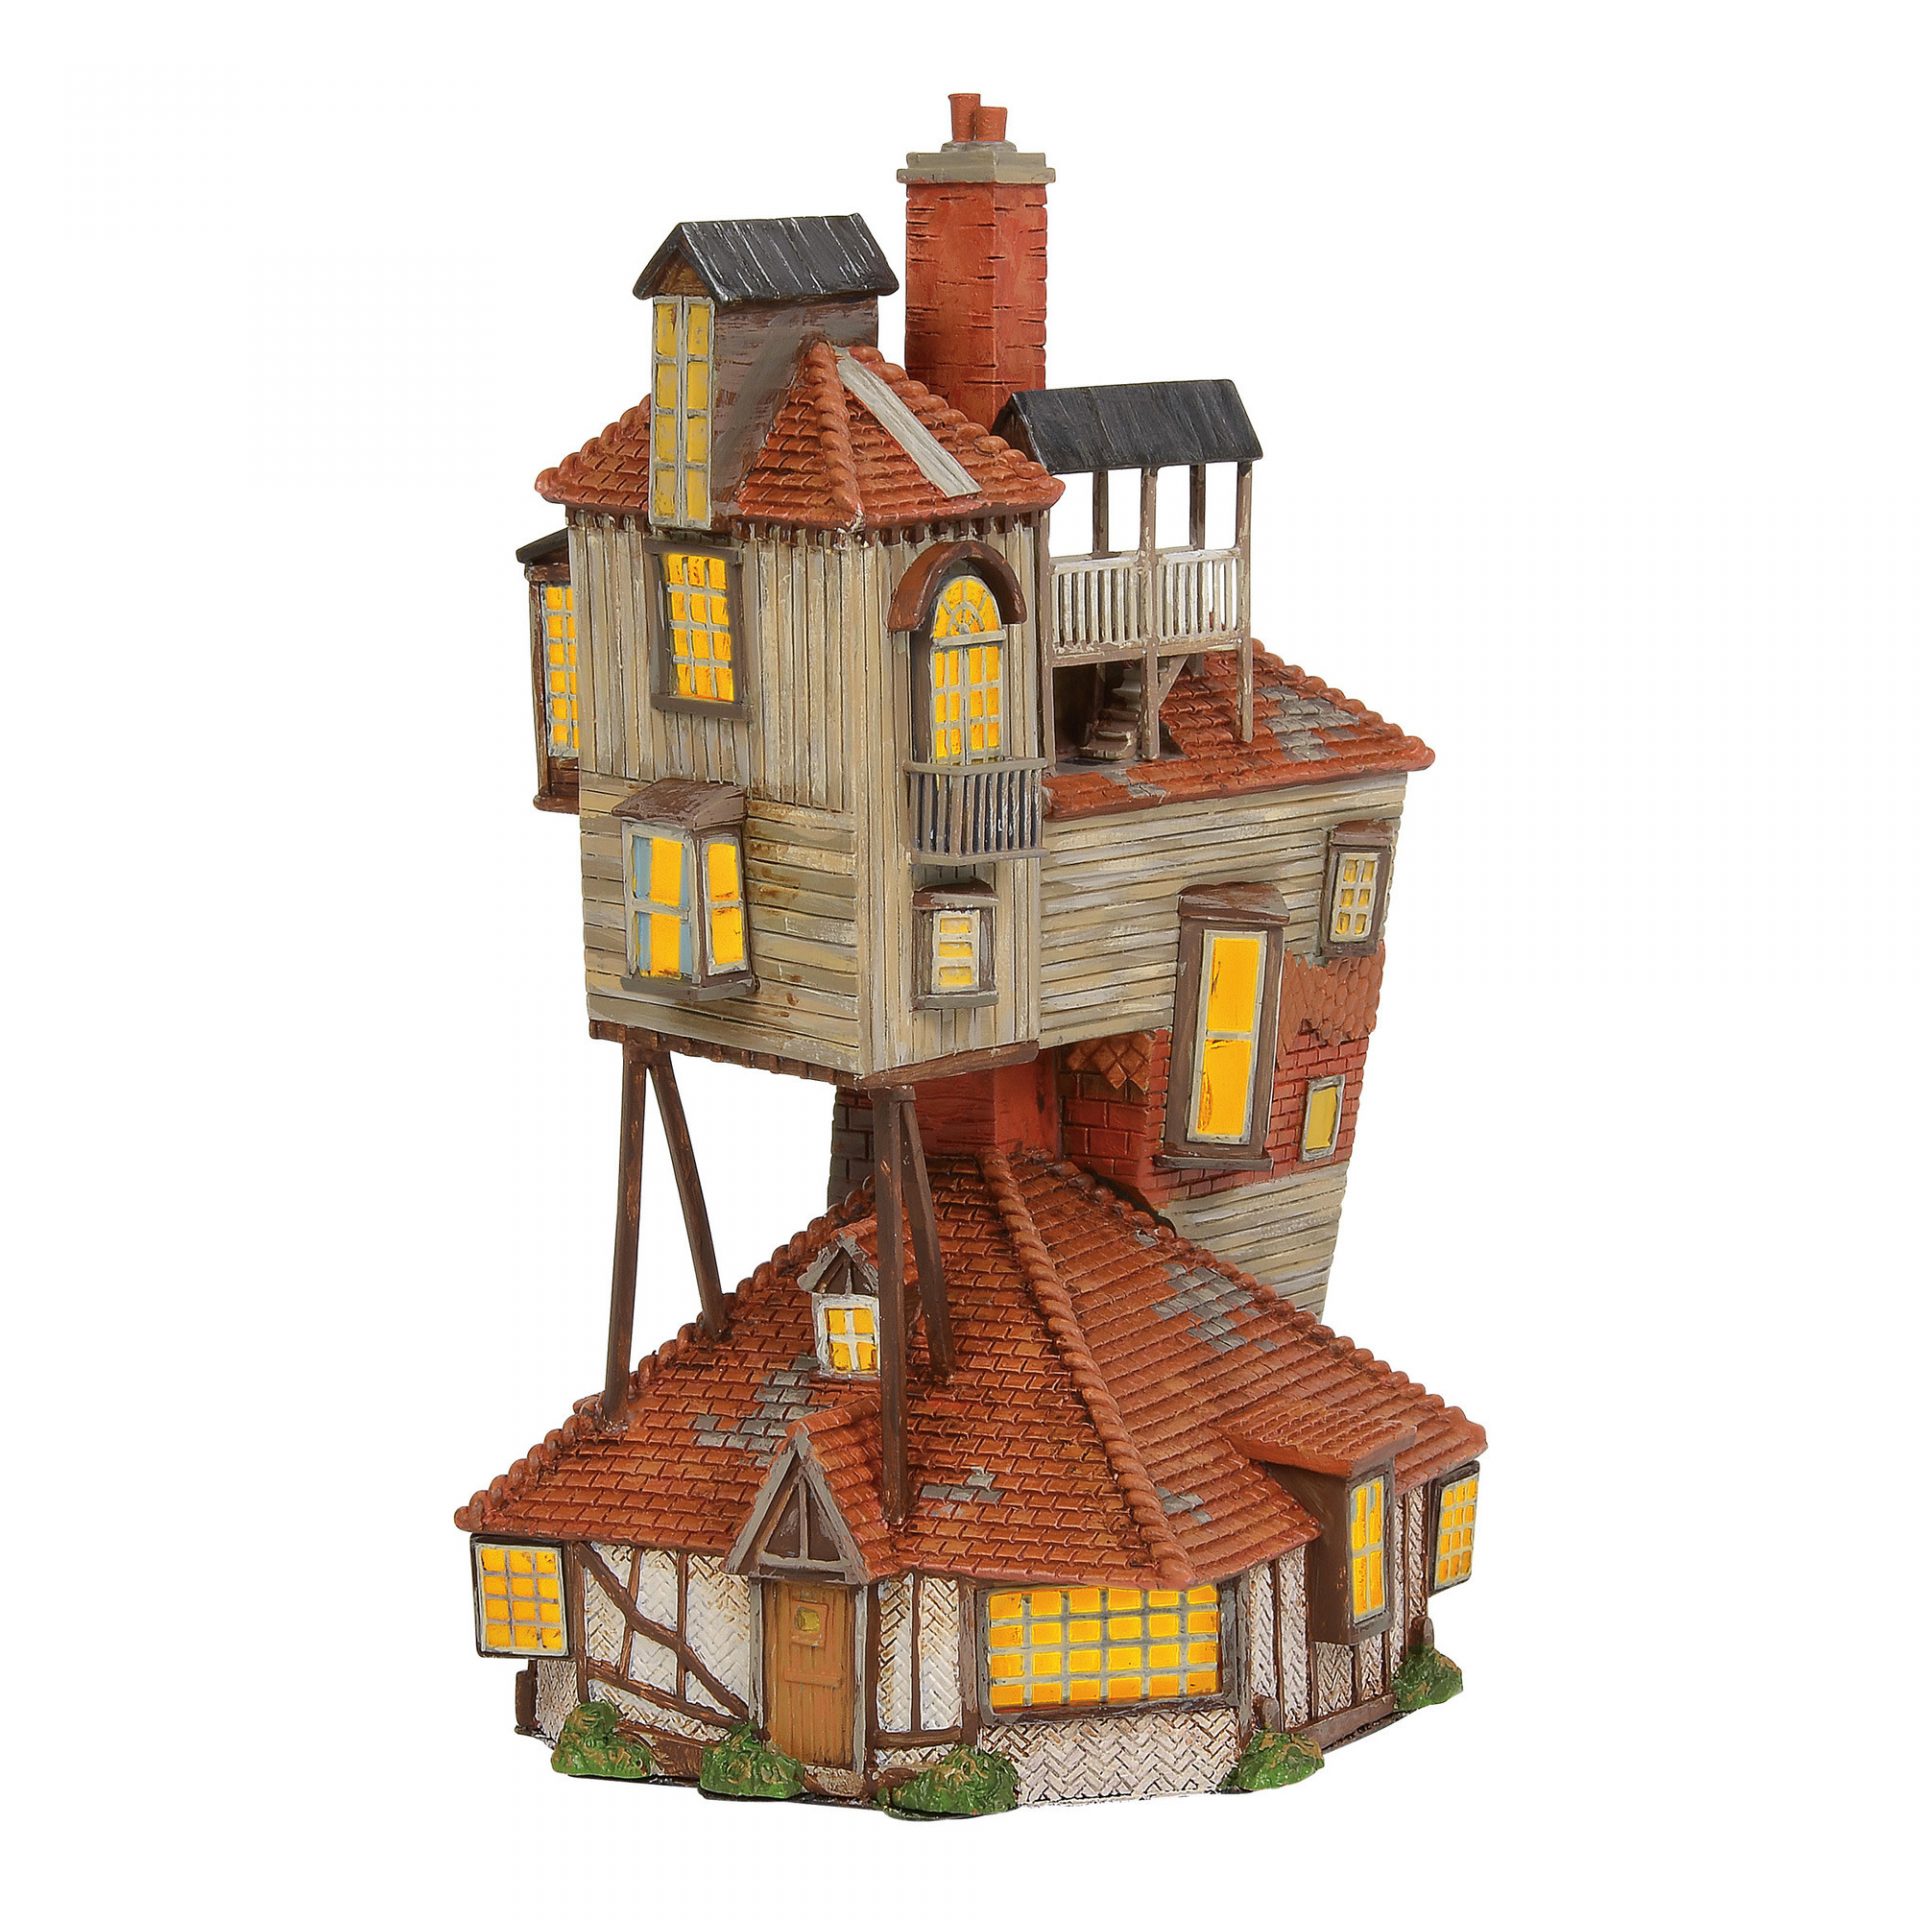 The Burrow by Department 56 by Rich Mar Florist